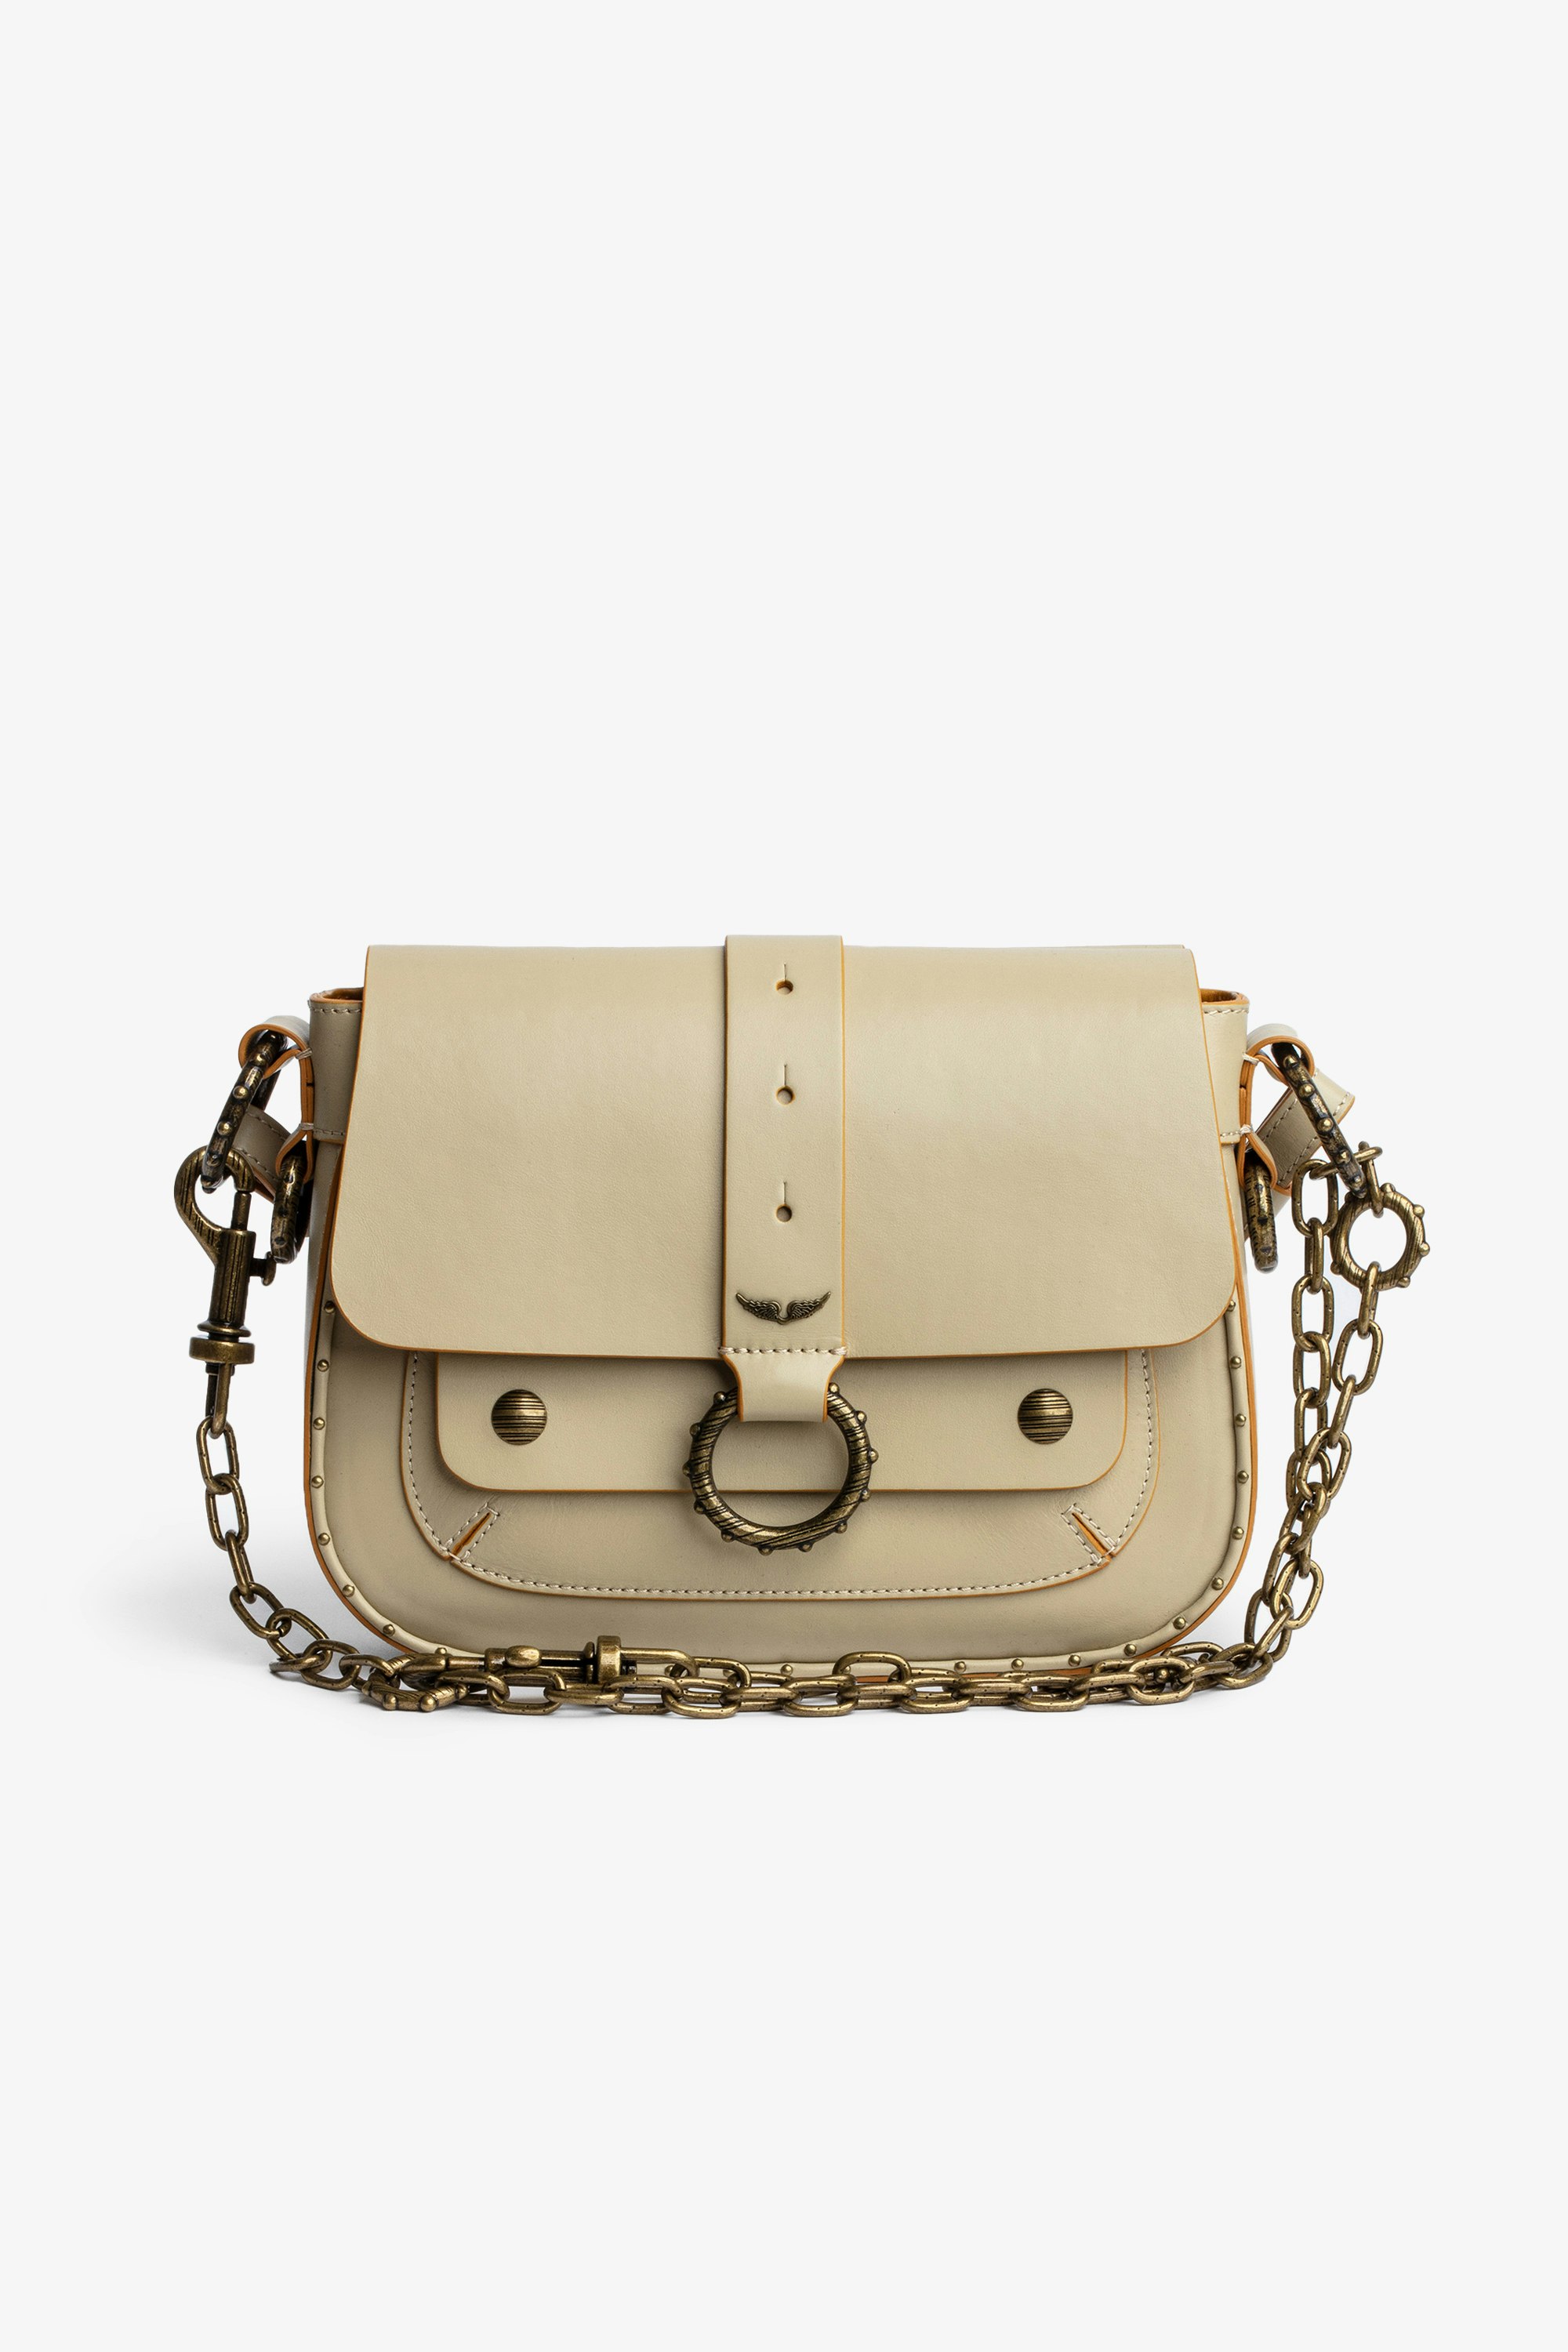 Kate バッグ Women’s beige leather bag with flap and adjustable shoulder strap